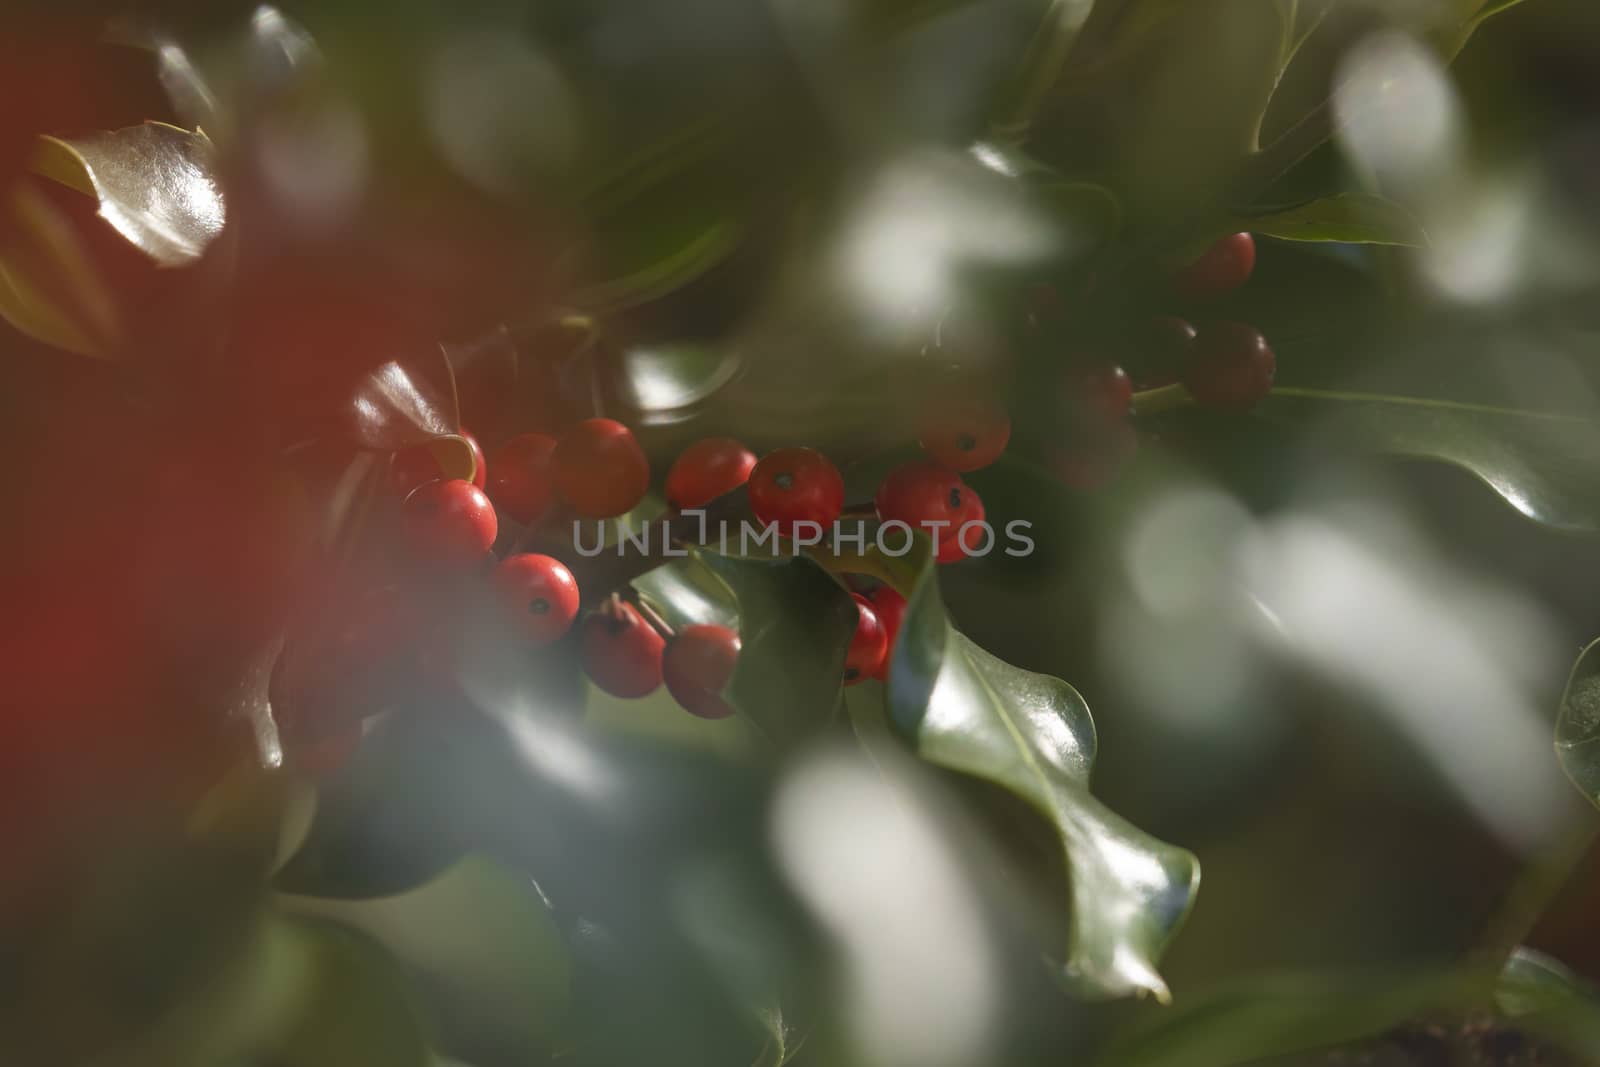 Wild holly in its natural environment, in the forest, with its red berries hidden among the leaves, near the small town of Luesia, in the upper area of the Cinco Villas region, Spain.